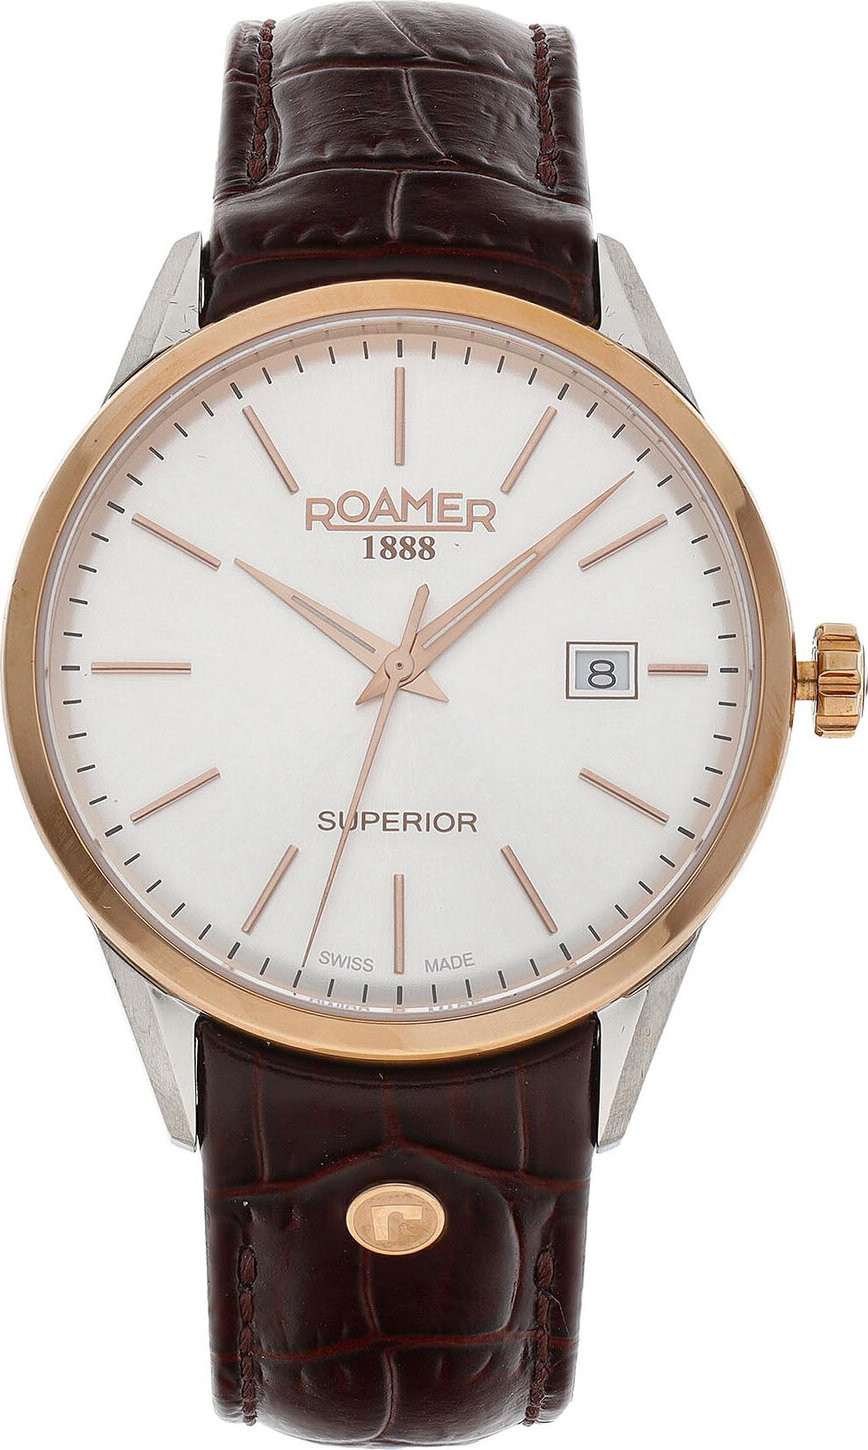 Hodinky Roamer Superior 3H 508833 49 15 05 Silver/Rose Gold/Brown